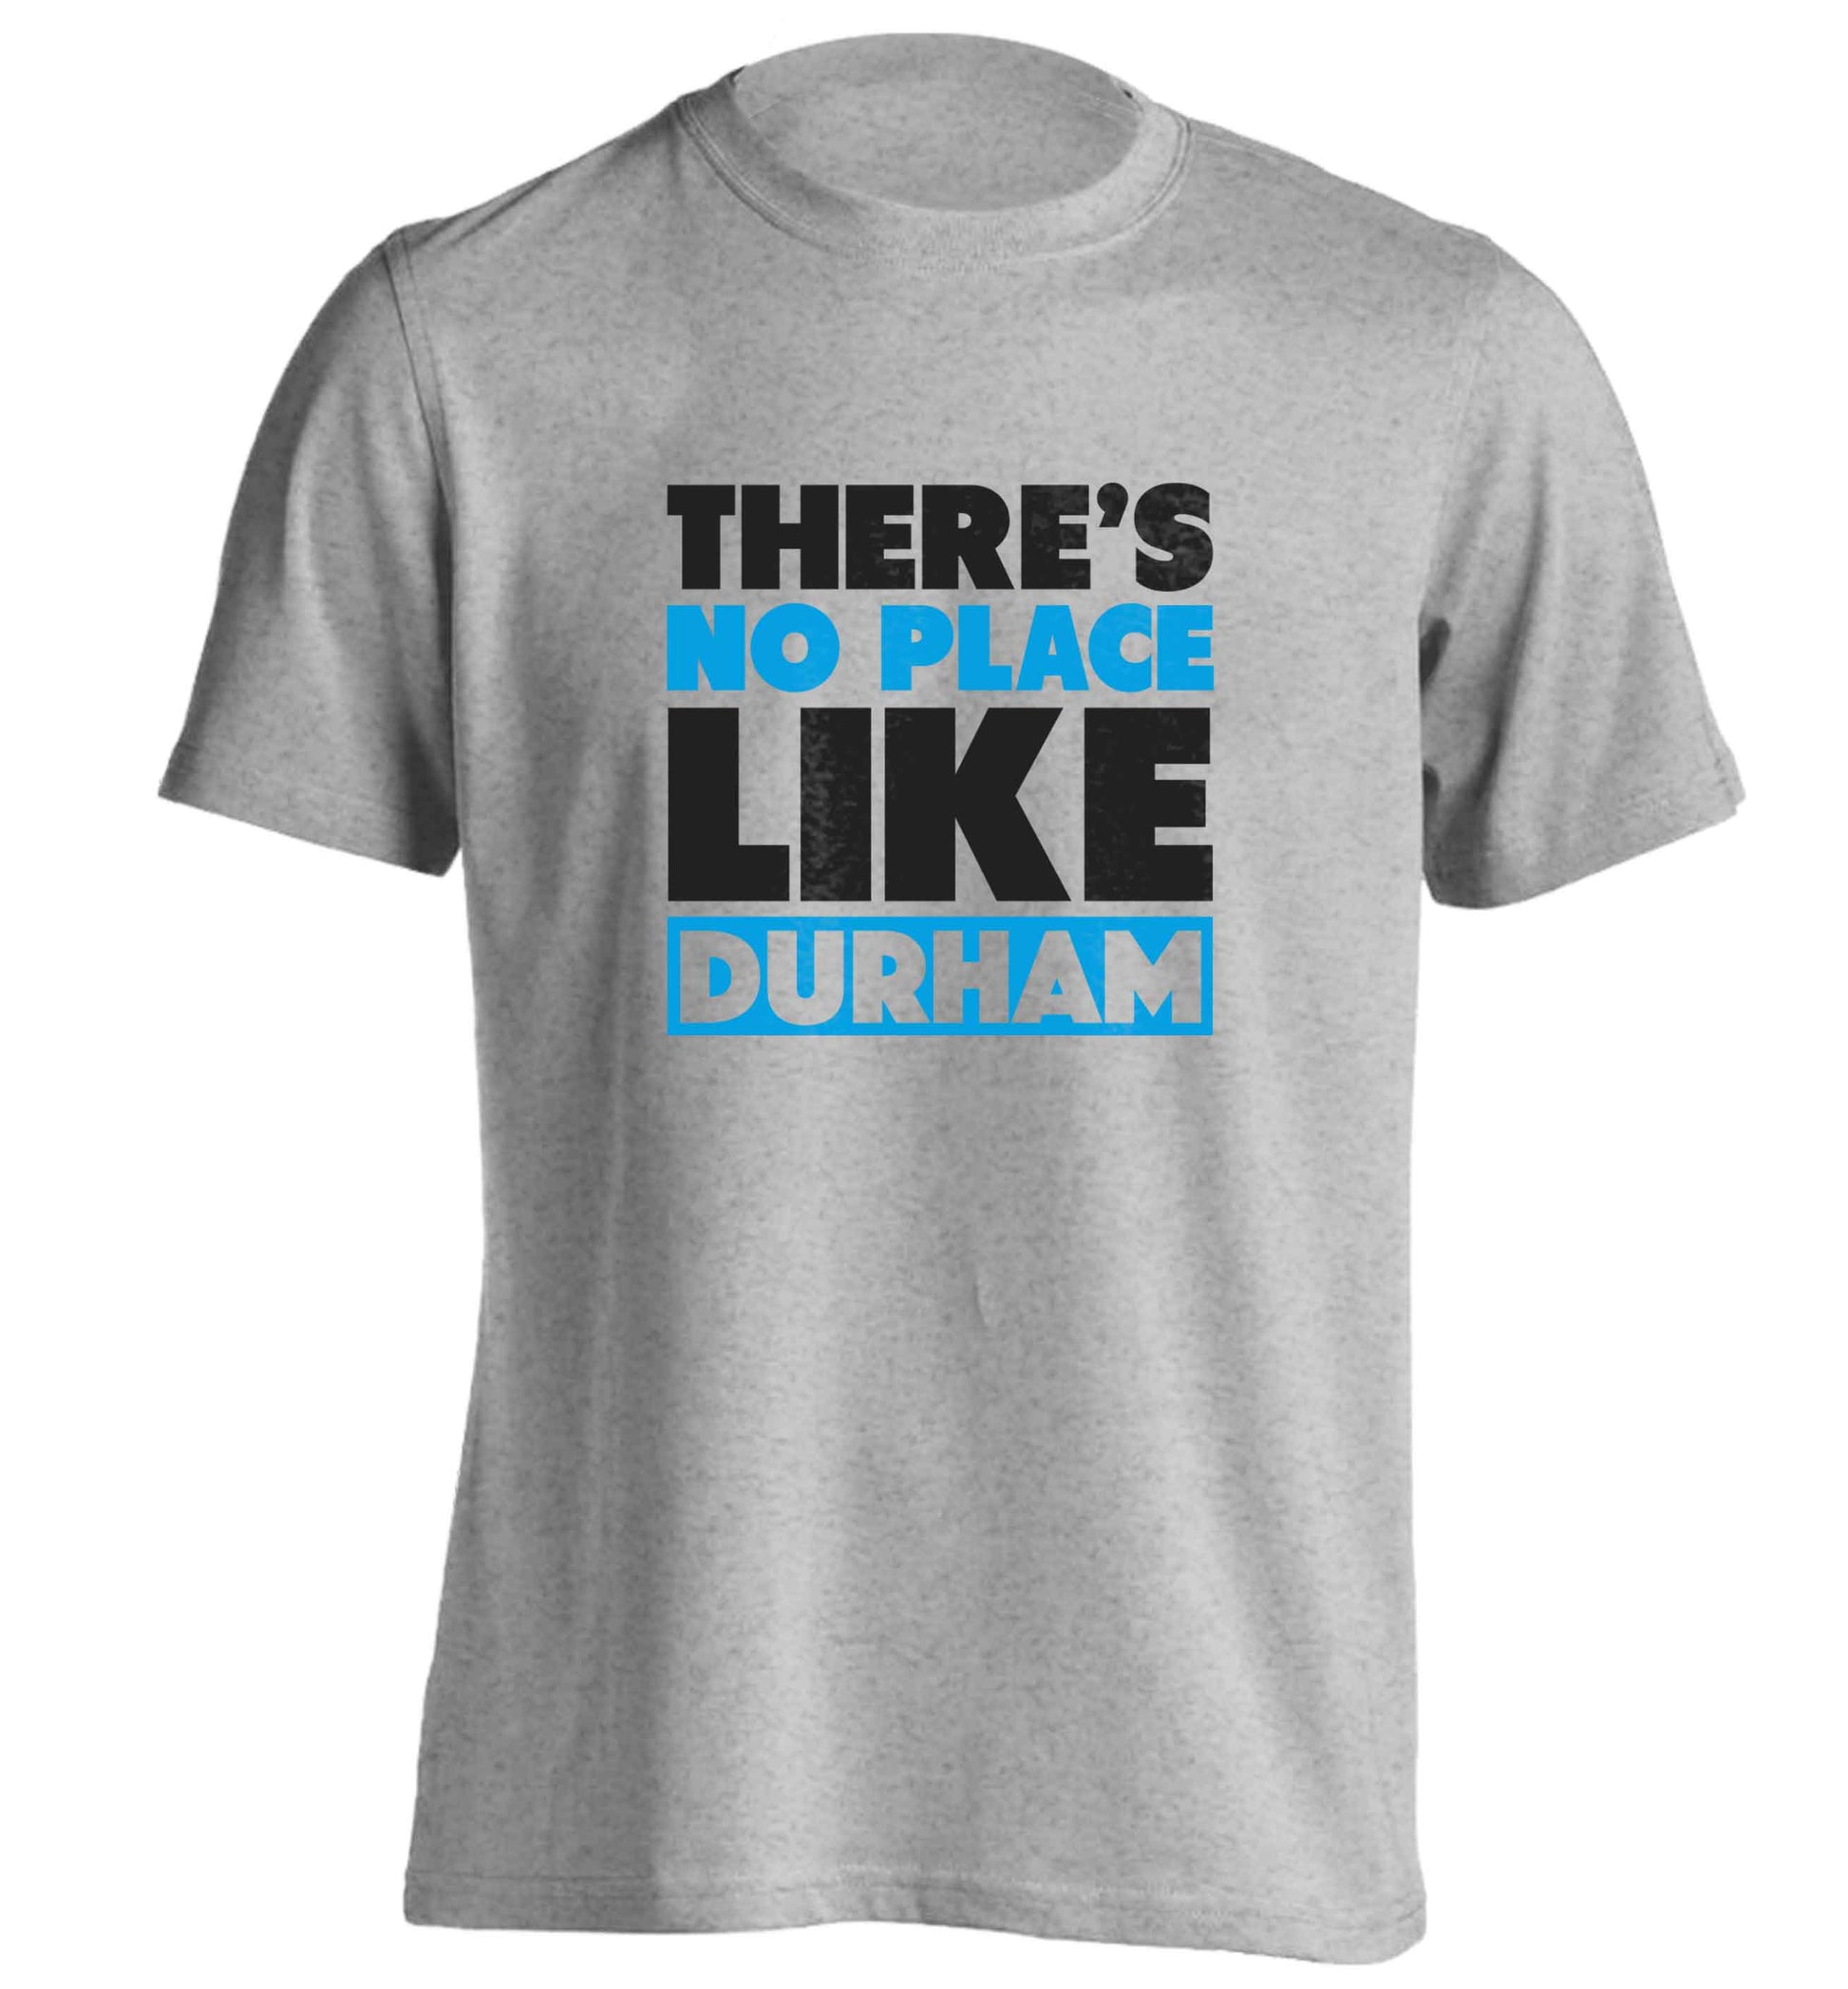 There's no place like Durham adults unisex grey Tshirt 2XL